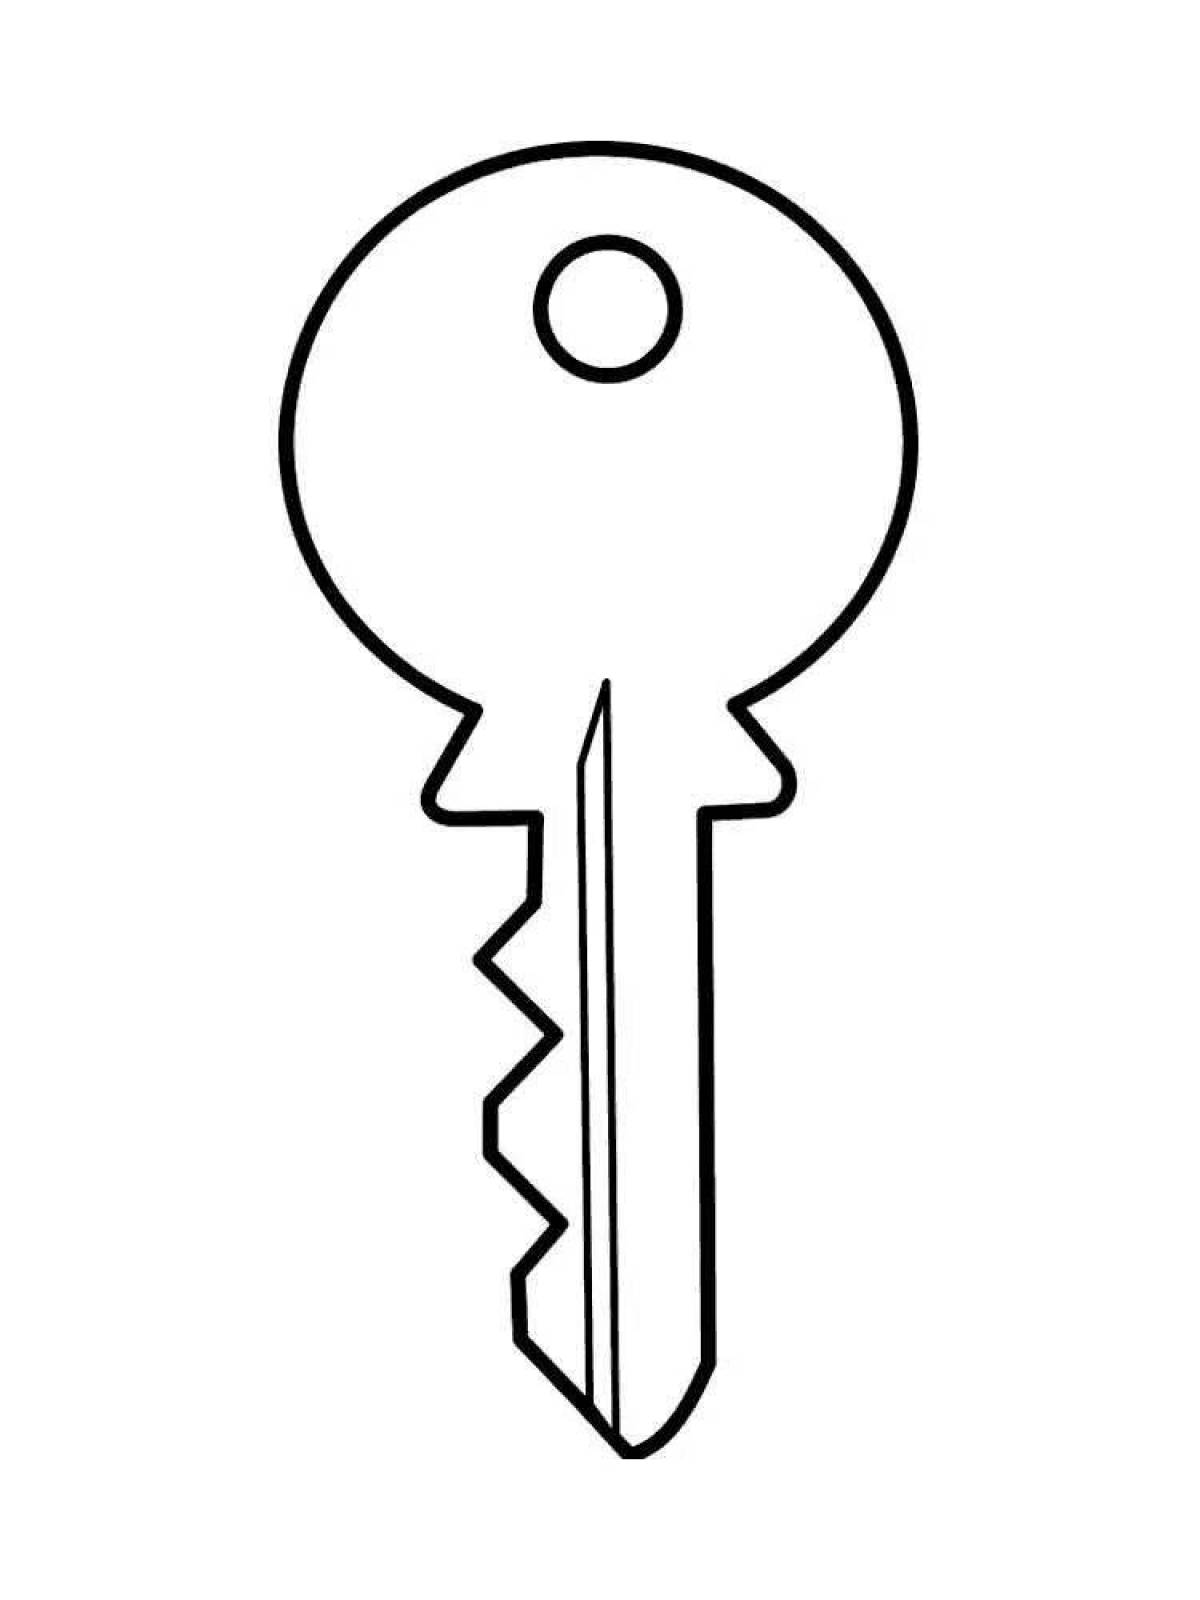 Coloring page of keys with color splashes for kids